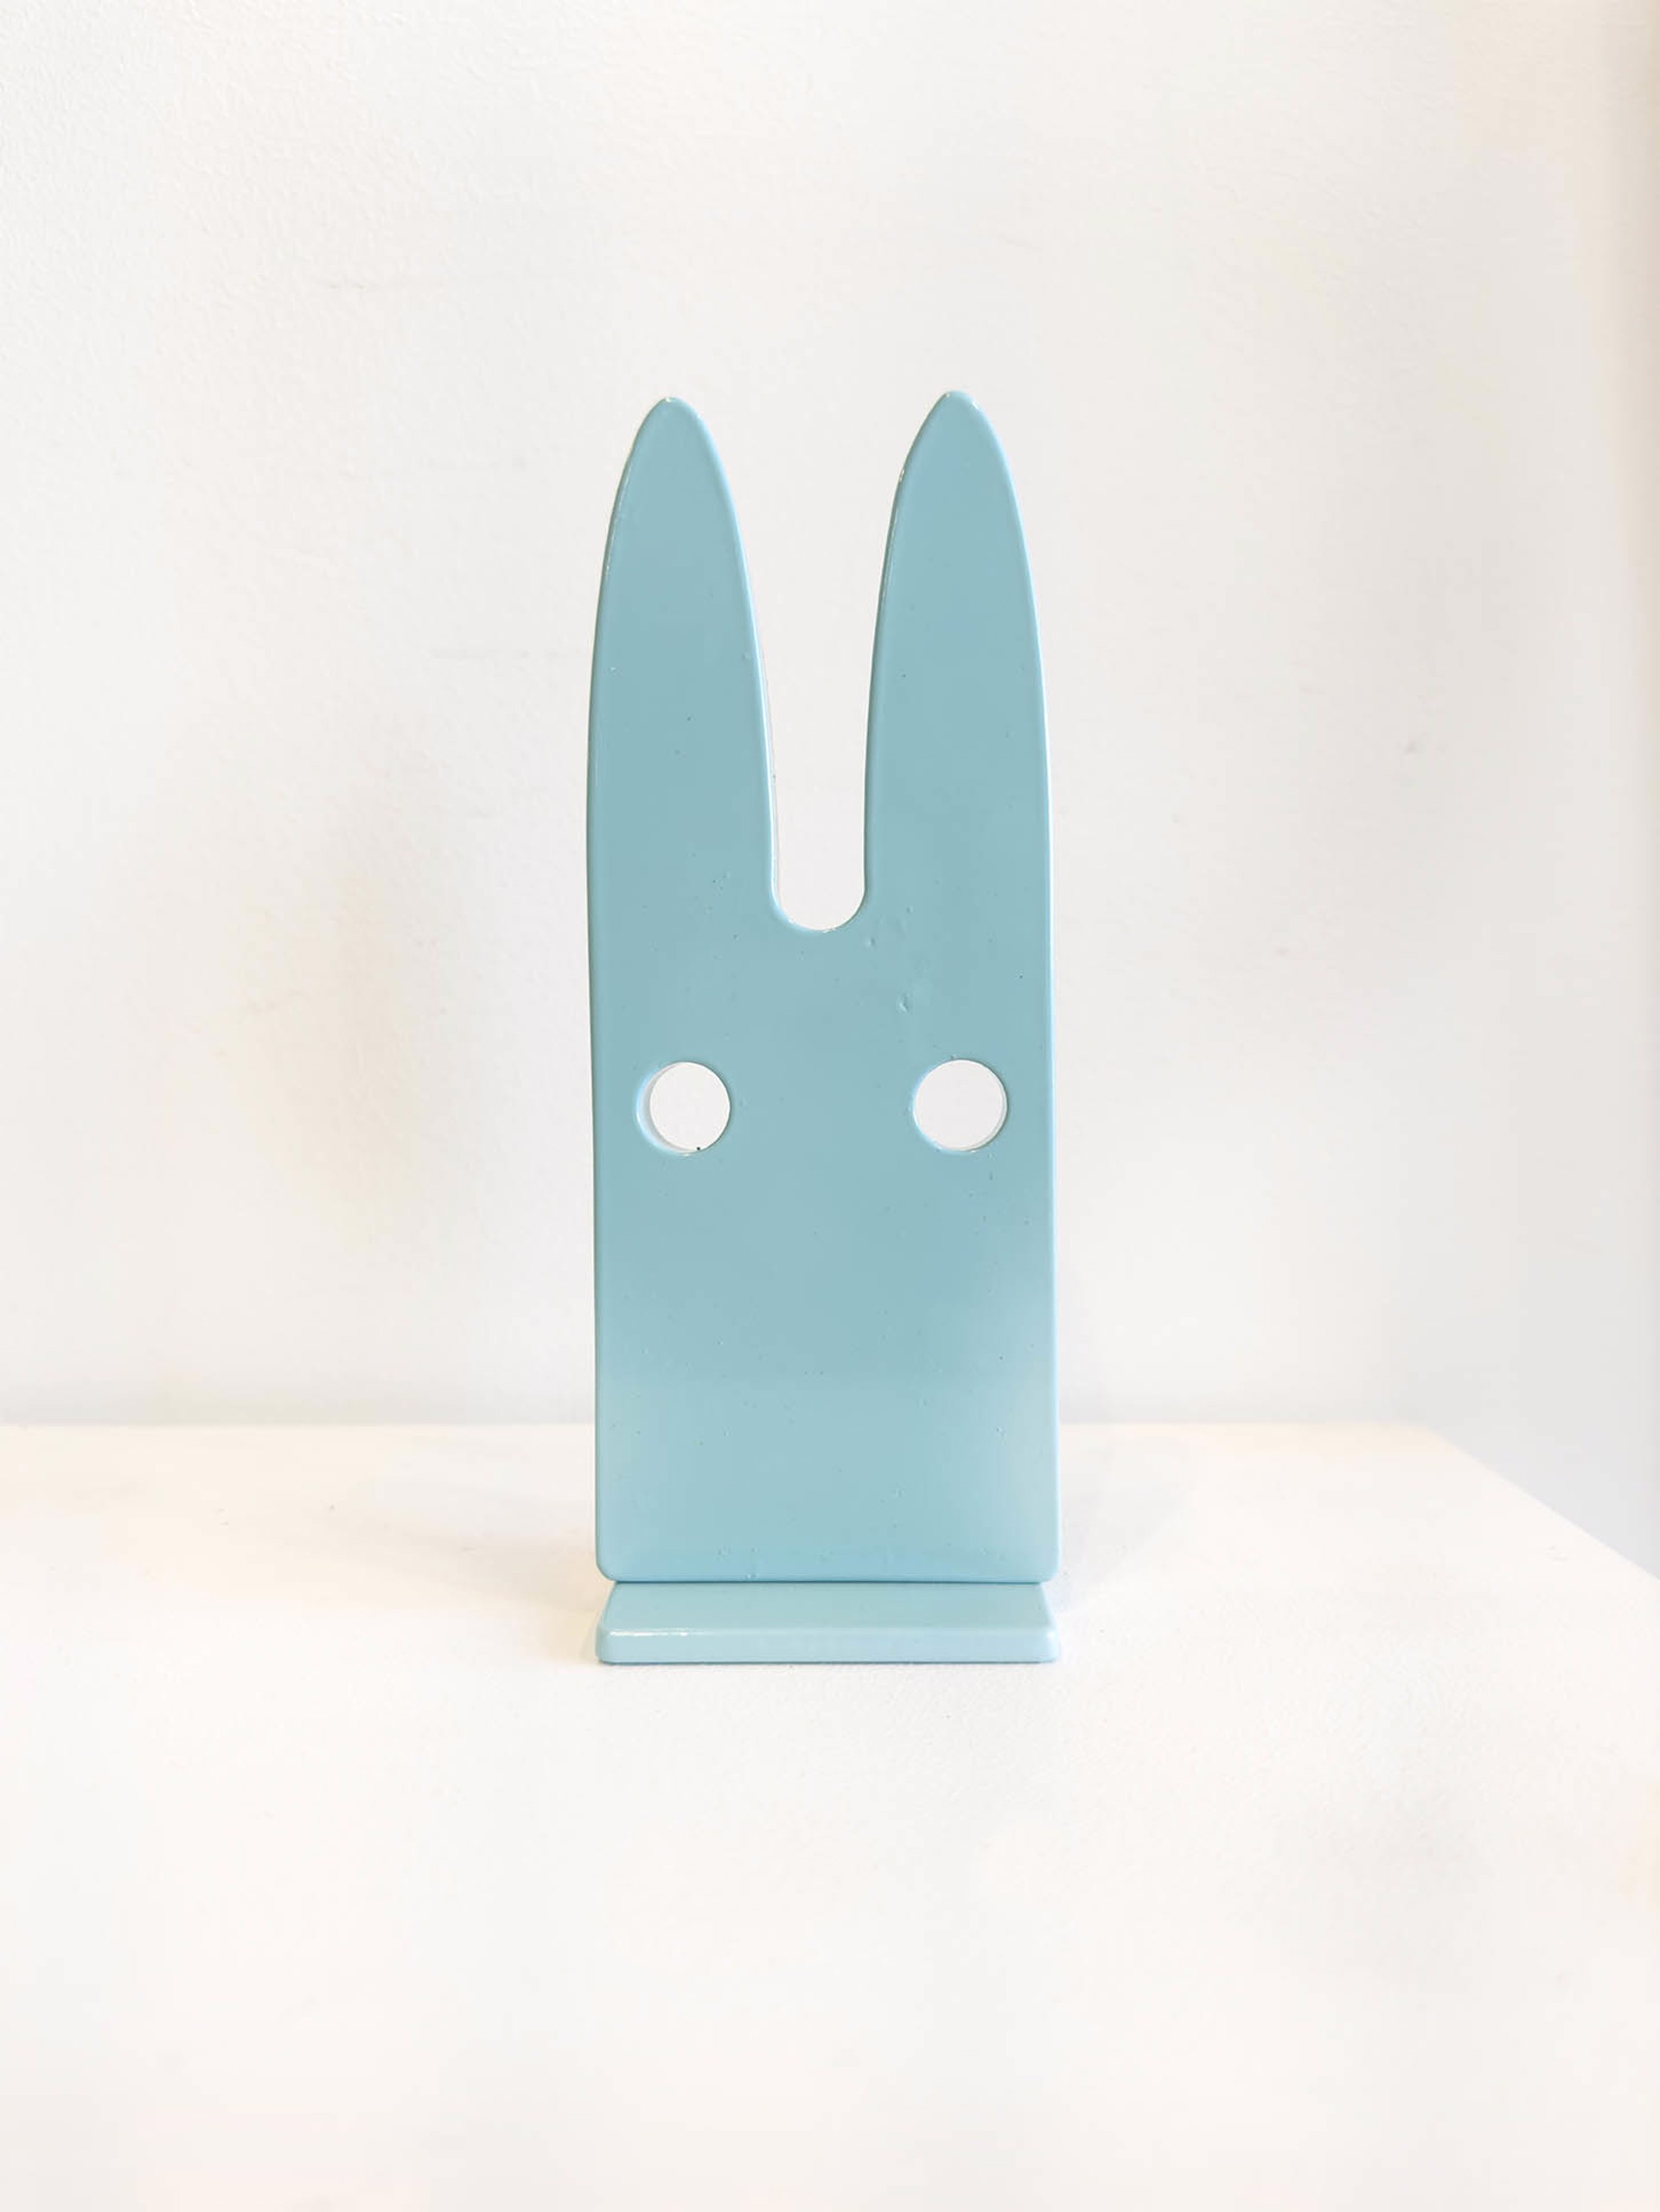 Miniature Aluminium Sculpture By Jeffie Brewer Featuring A Bunny In Simplified Shapes With Blue Finish